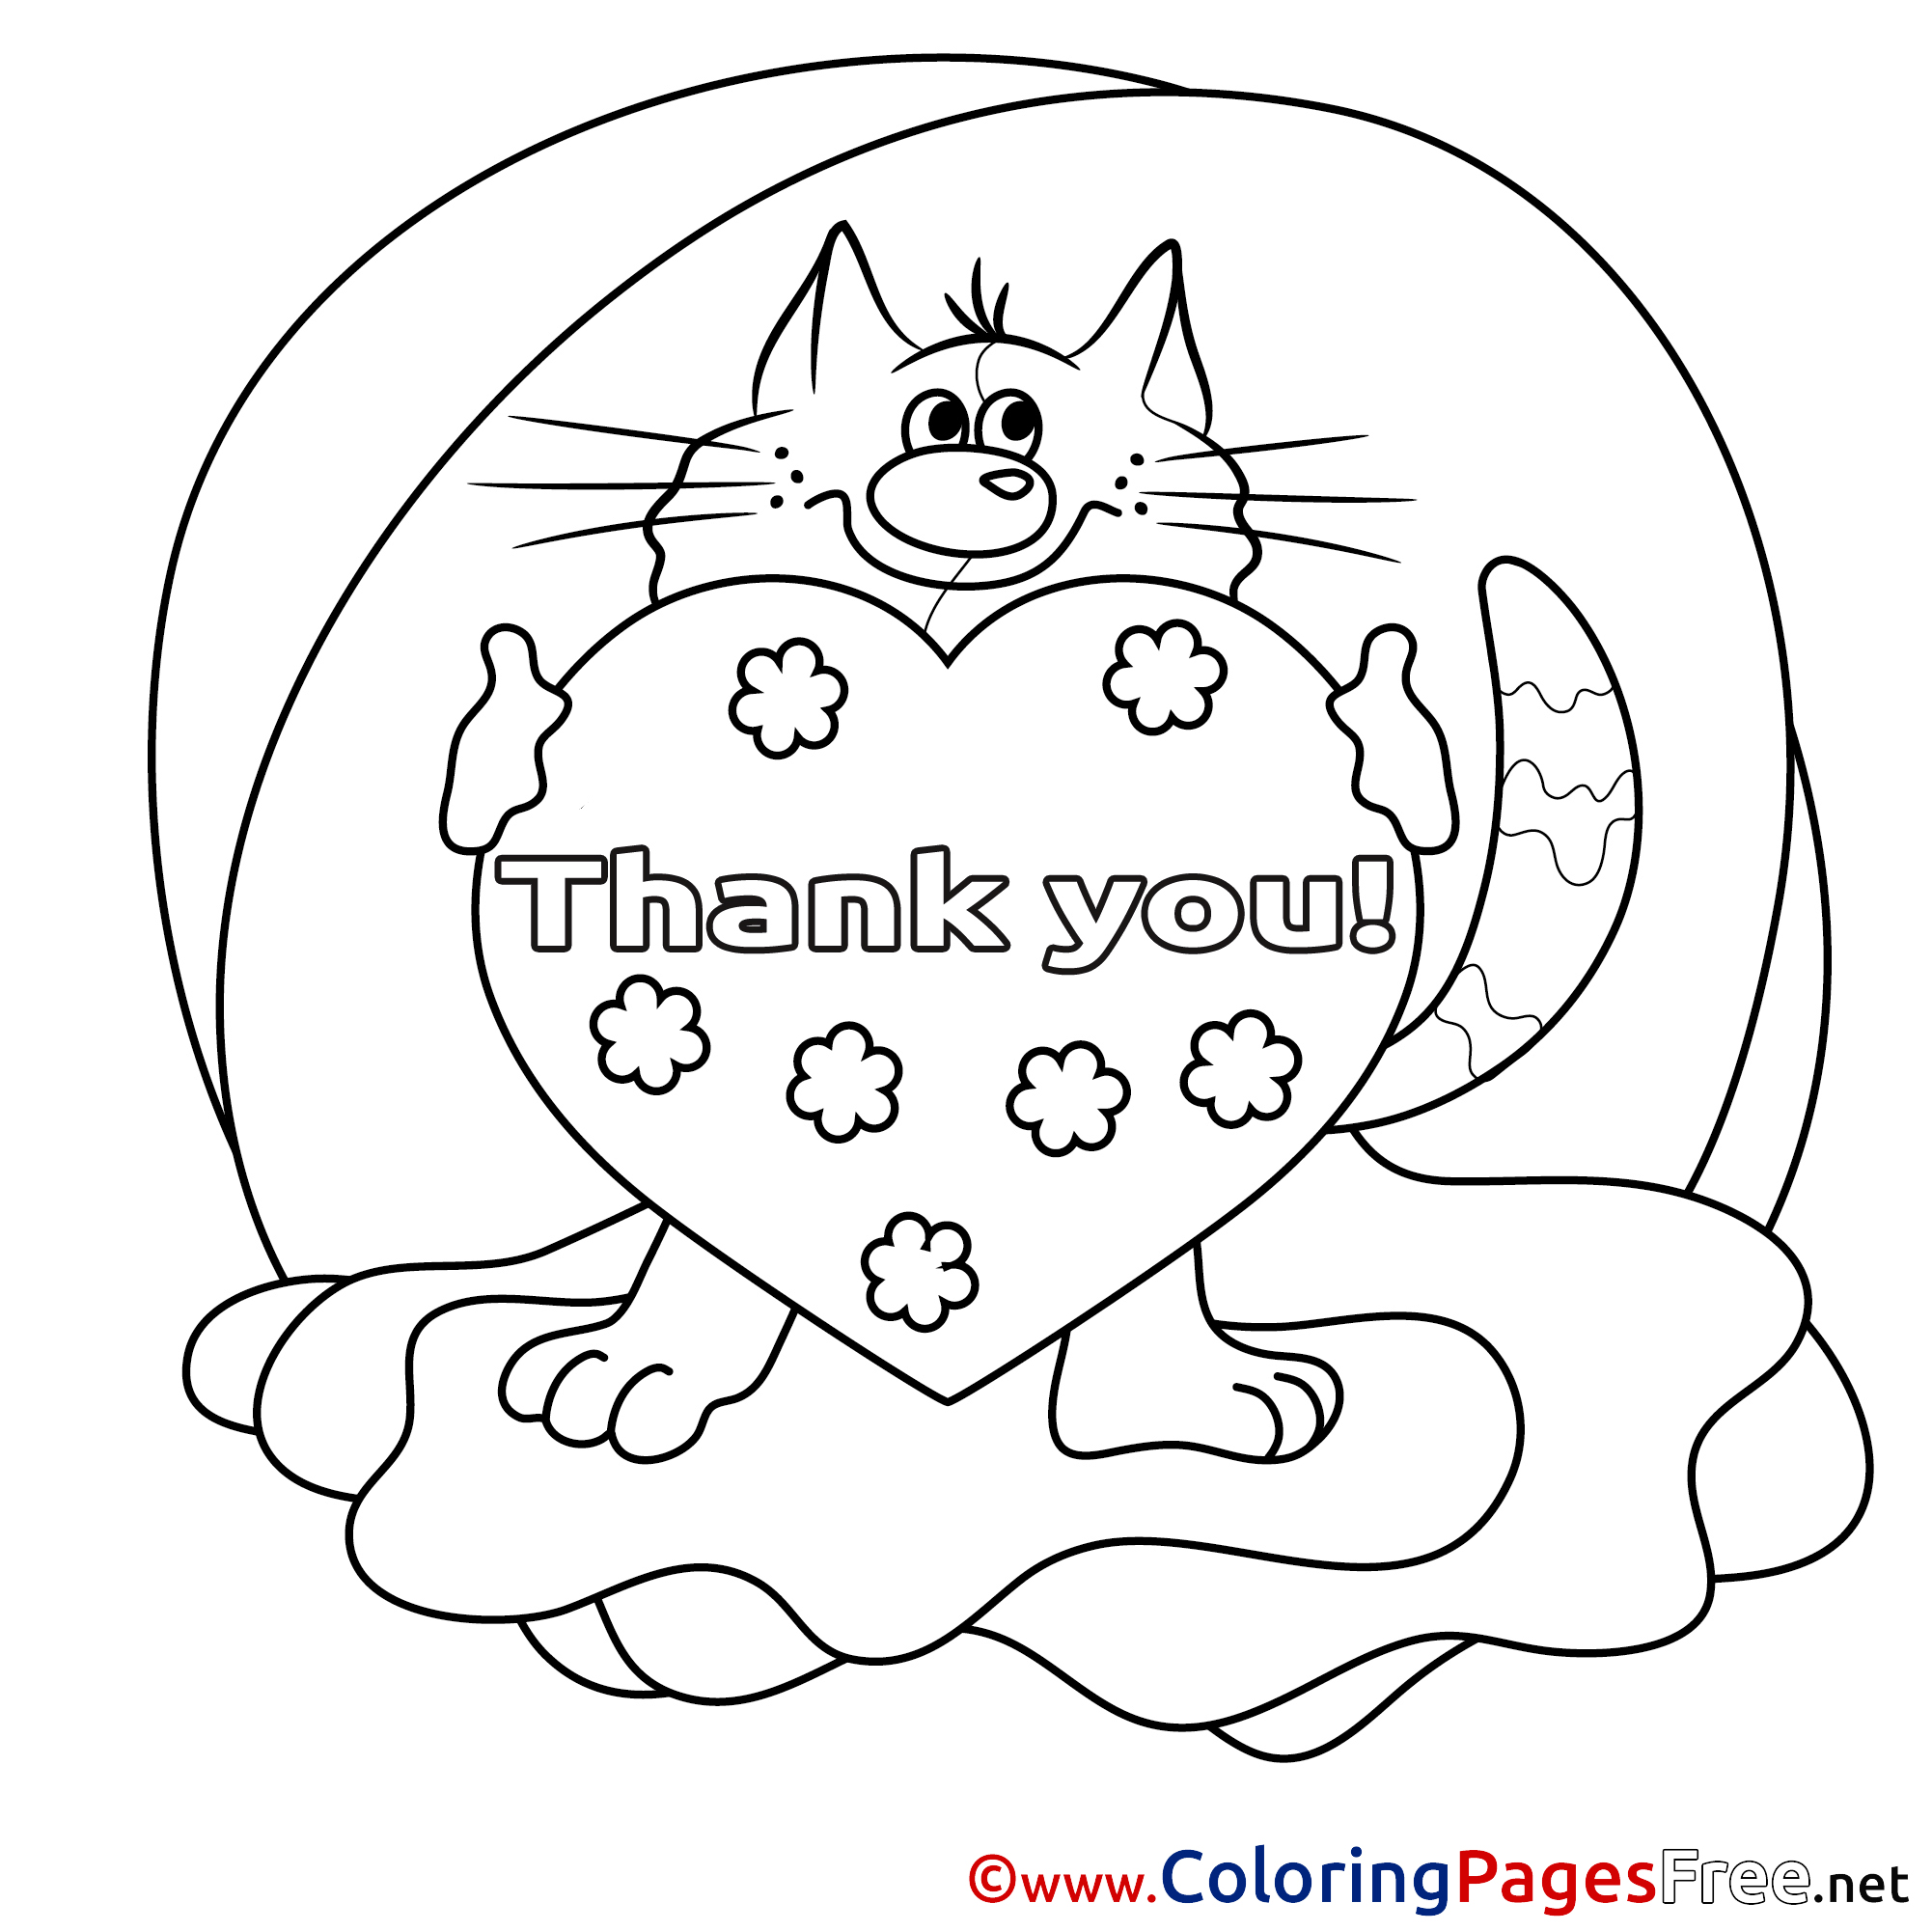 images of thank you coloring pages - photo #20